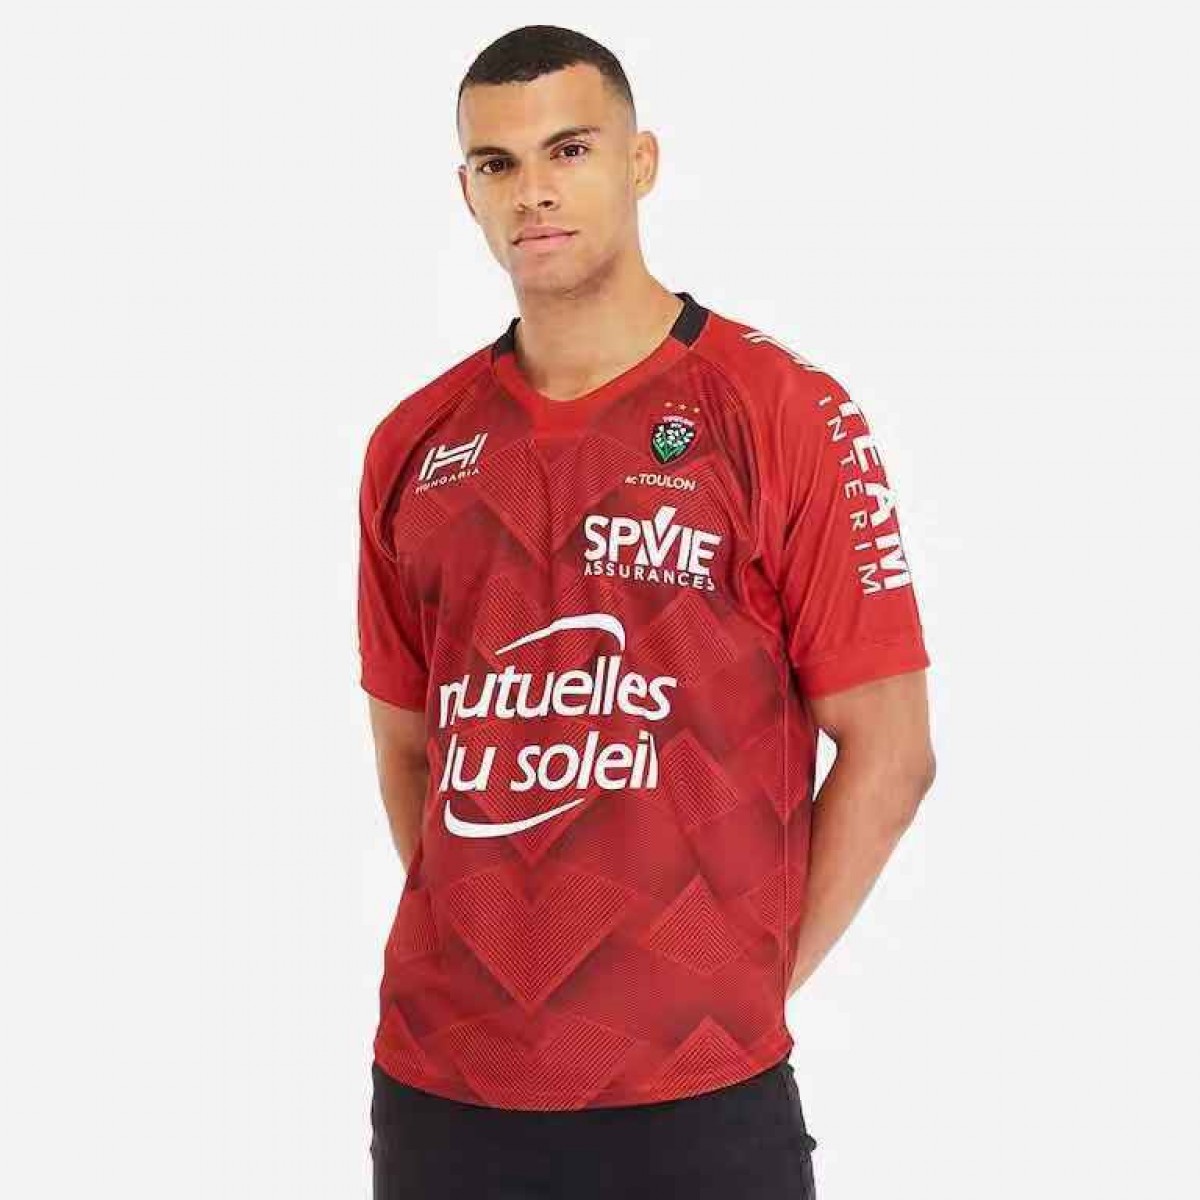 Toulon 2019/2020 home rugby jersey shirt S-3XL 